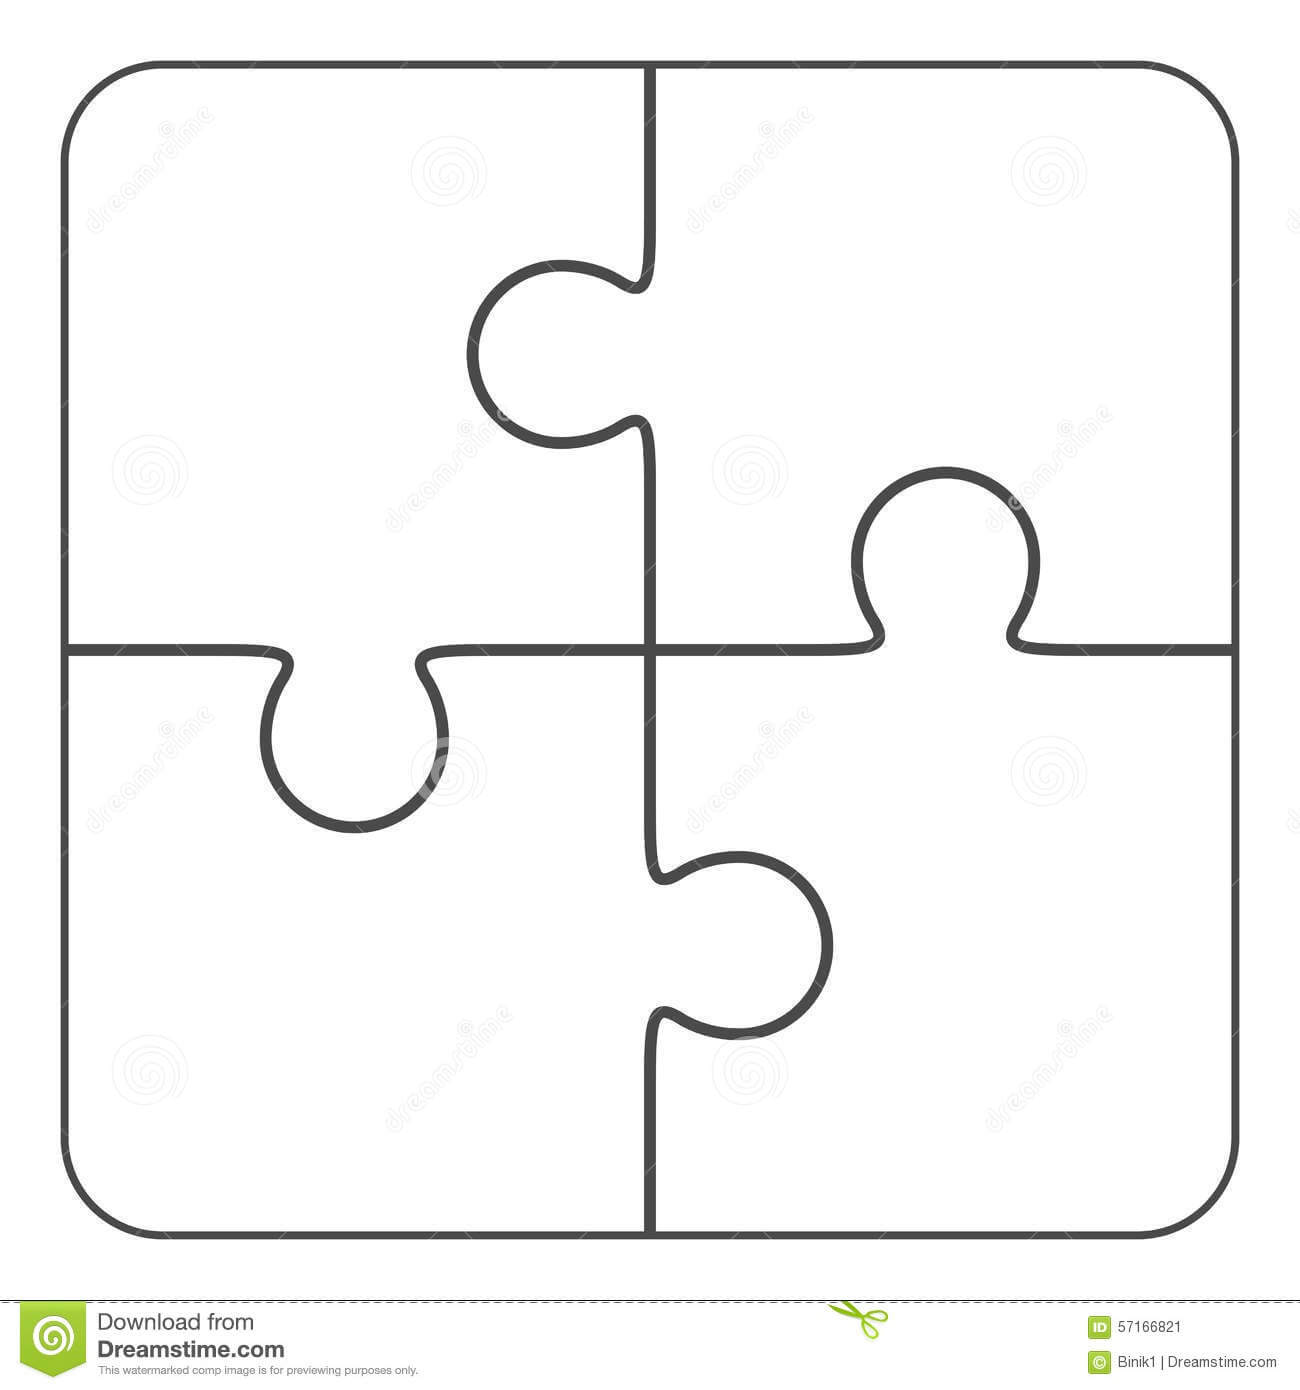 jigsaw-puzzle-blank-2x2-four-pieces-stock-illustration-intended-for